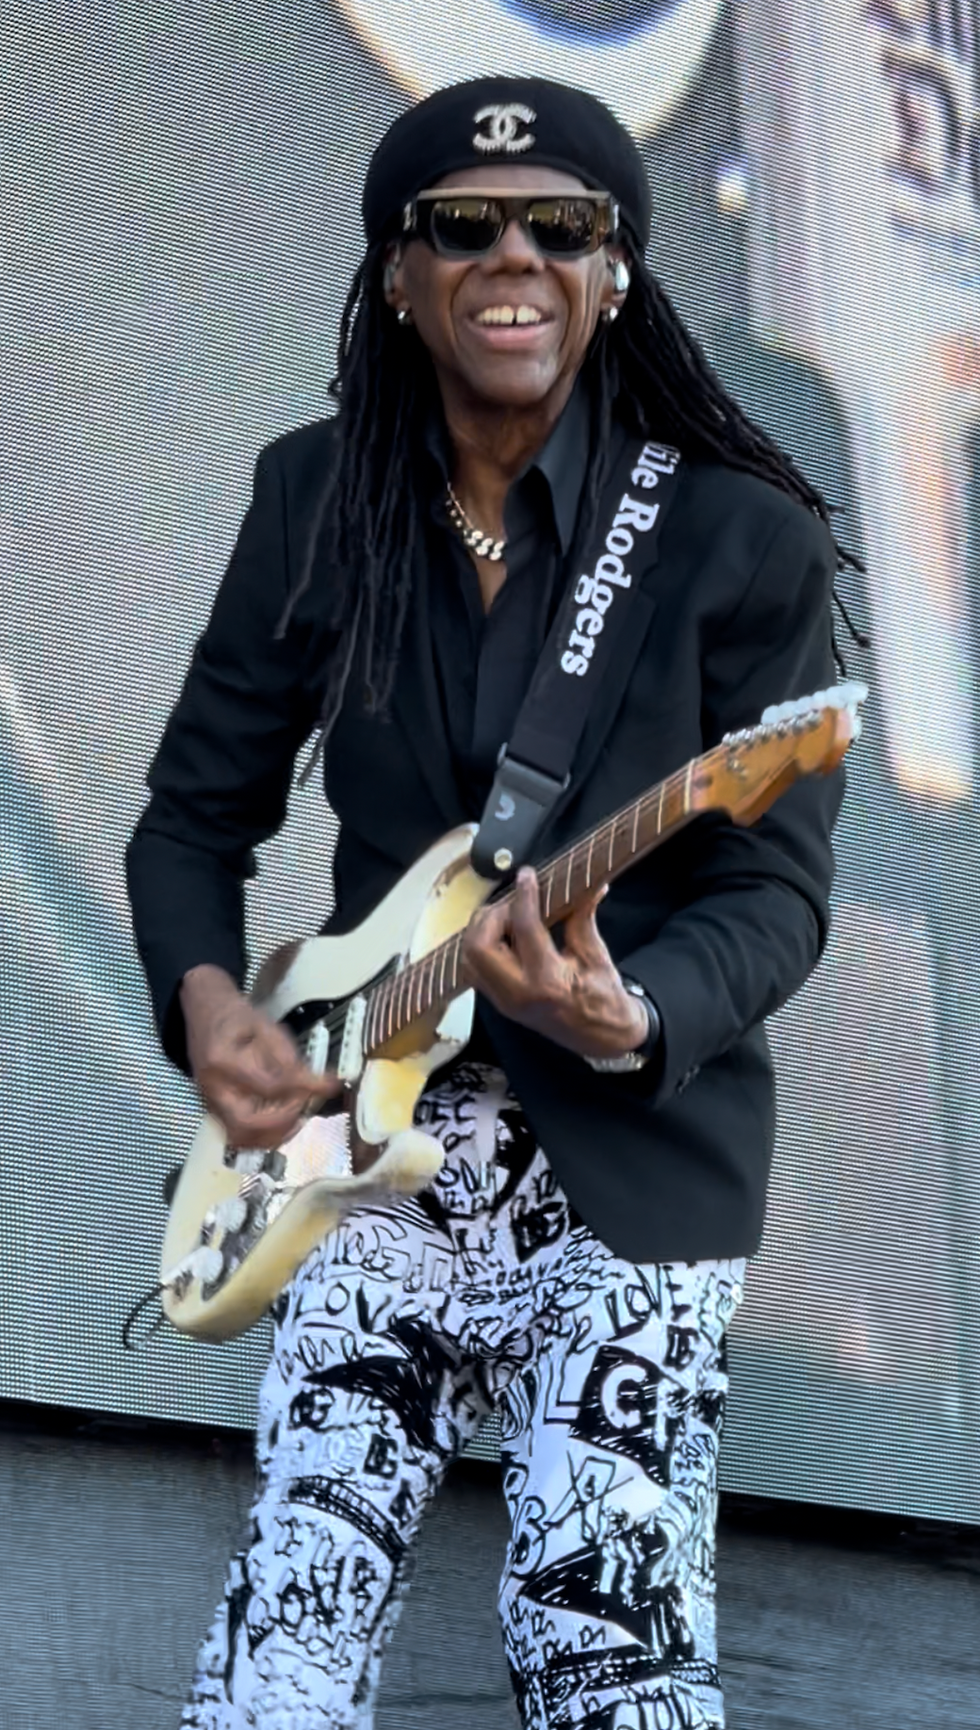 iPhone photo of Nile Rodgers of Chic at BottleRock 2023